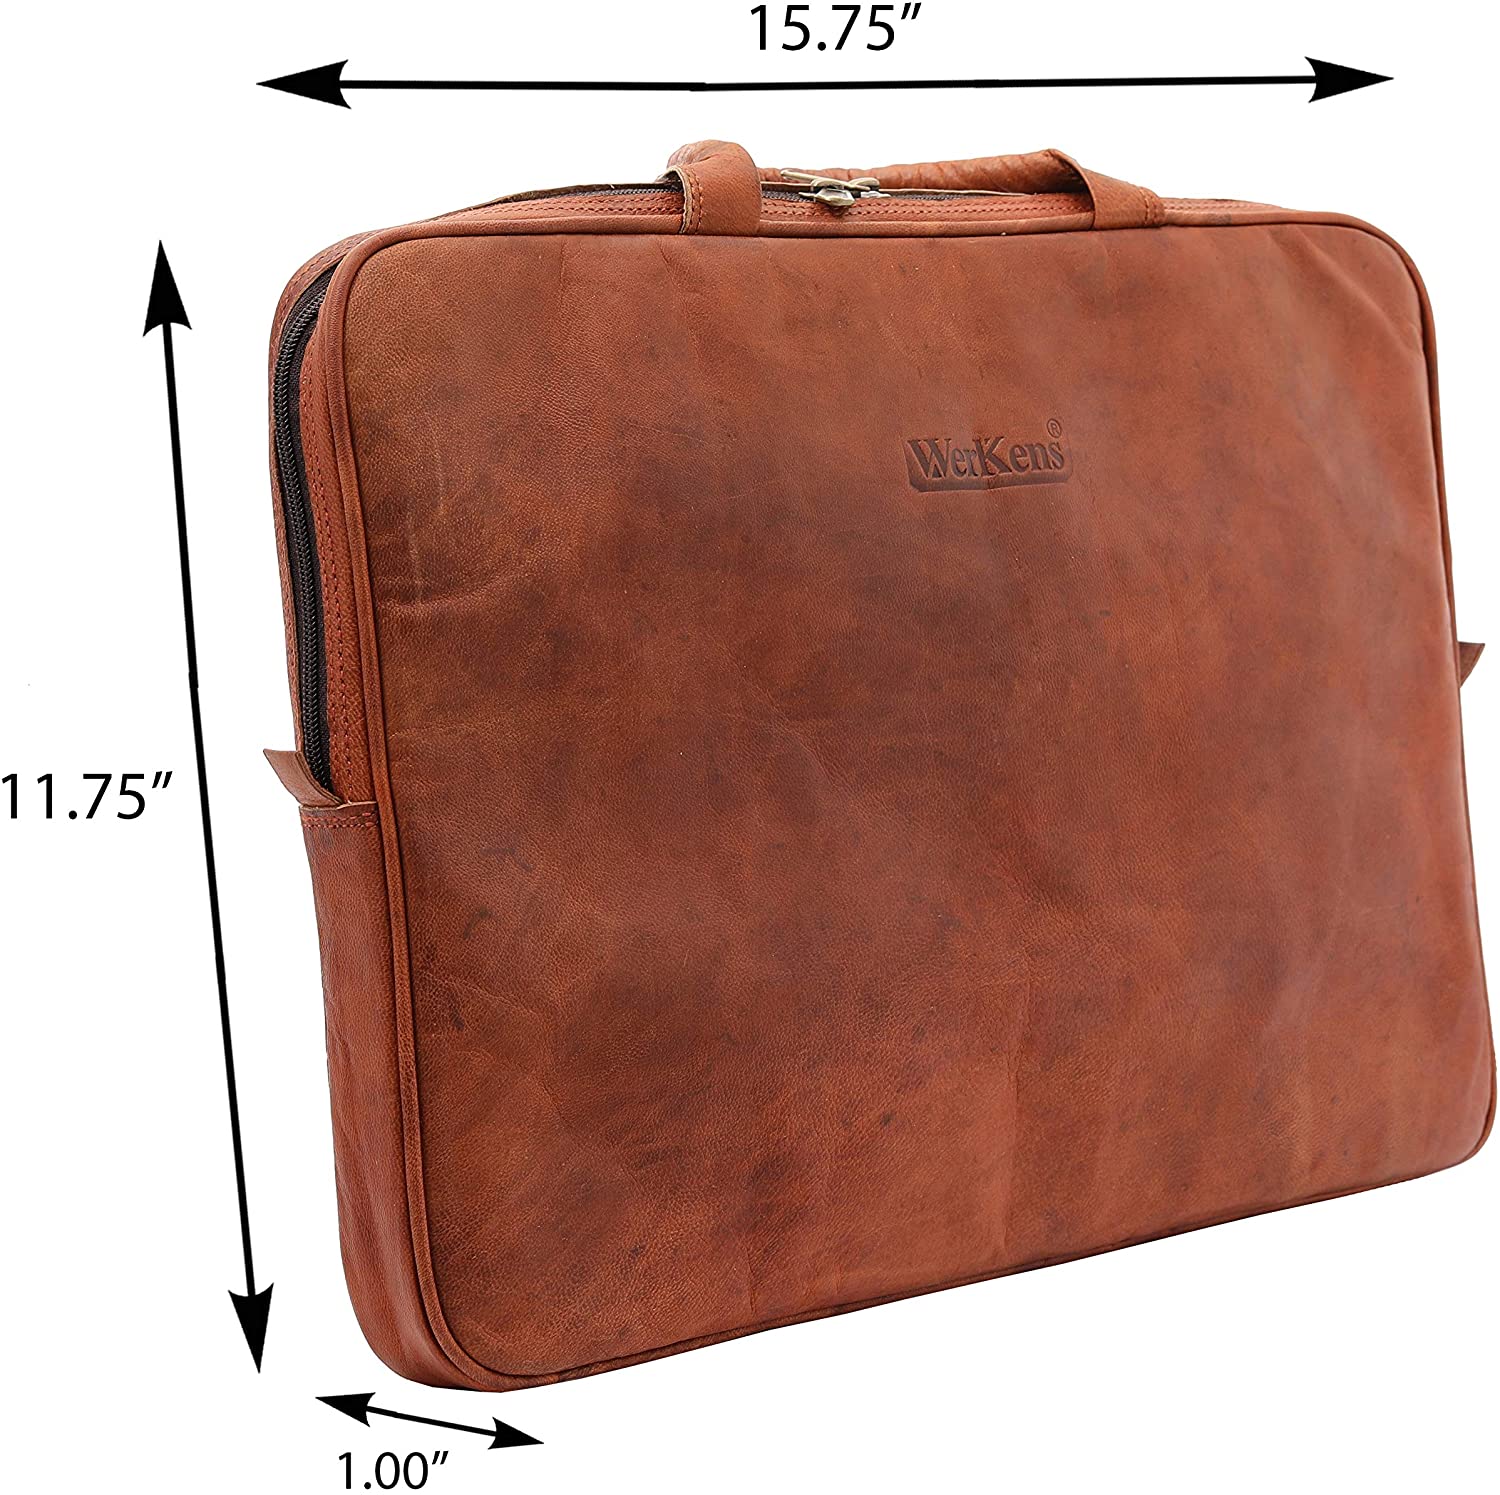 Leather Laptop Sleeve 15.6 inch Computer Case